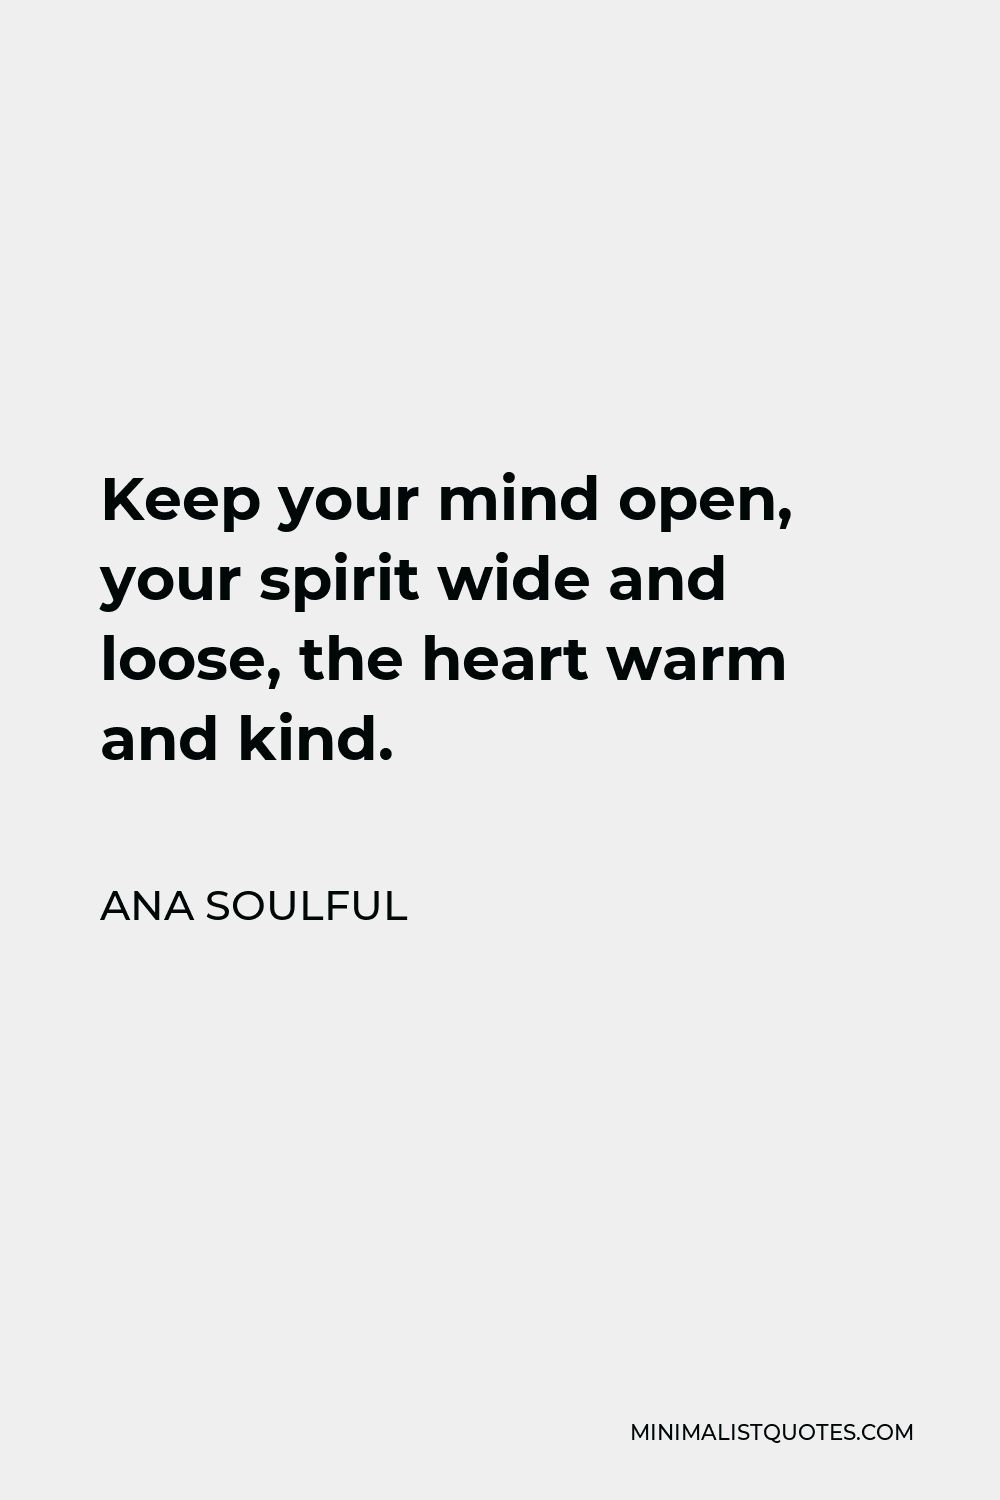 Ana Soulful Quote - Keep your mind open, your spirit wide and loose, the heart warm and kind.